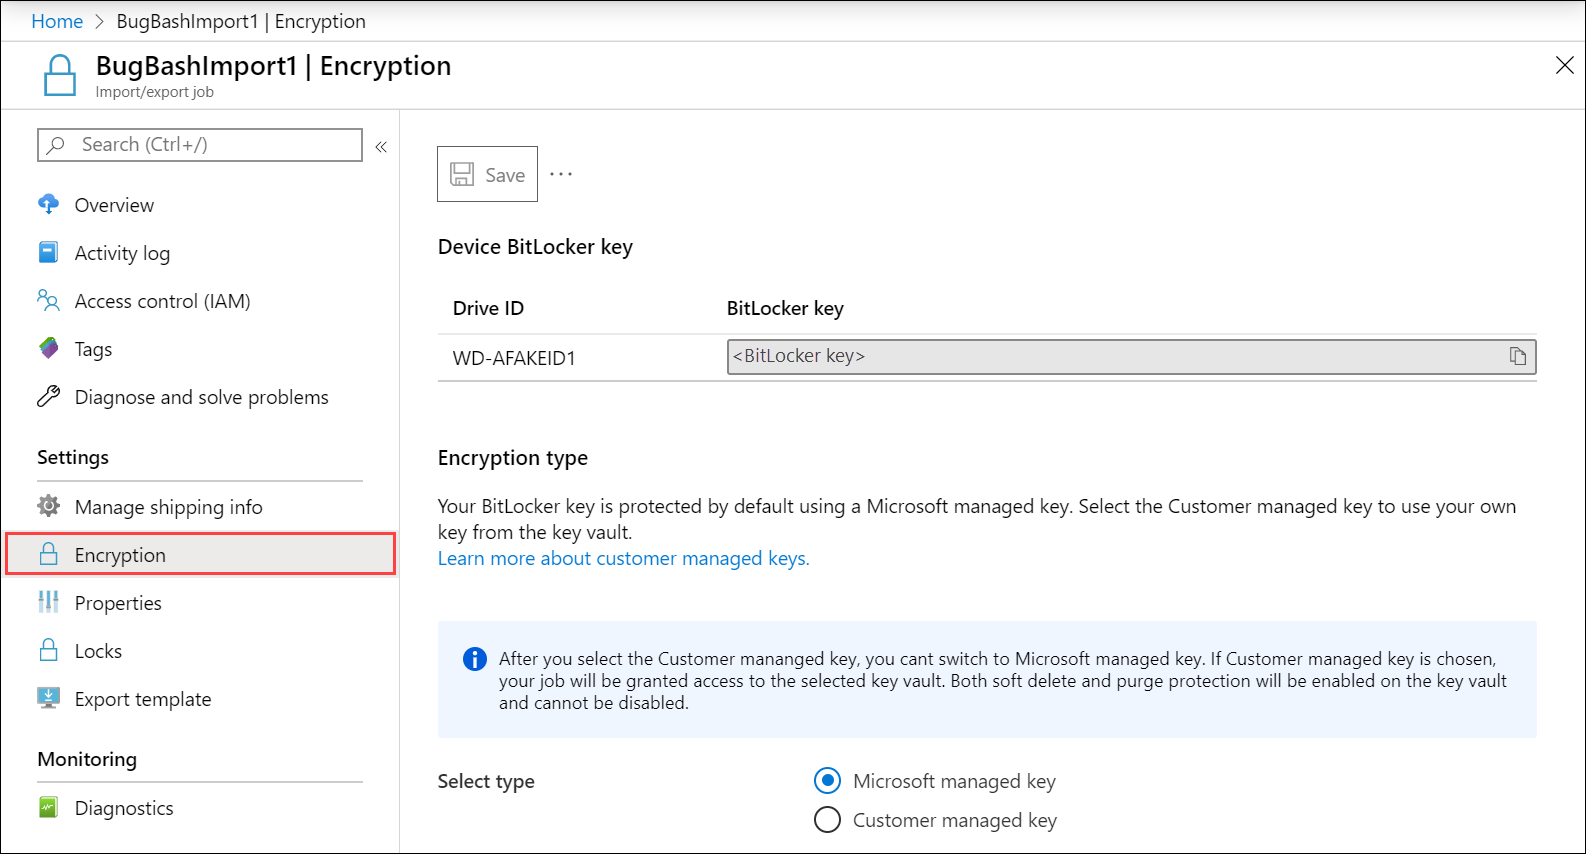 Screenshot of Encryption blade for an Azure Import/Export order. Encryption menu item is highlighted.